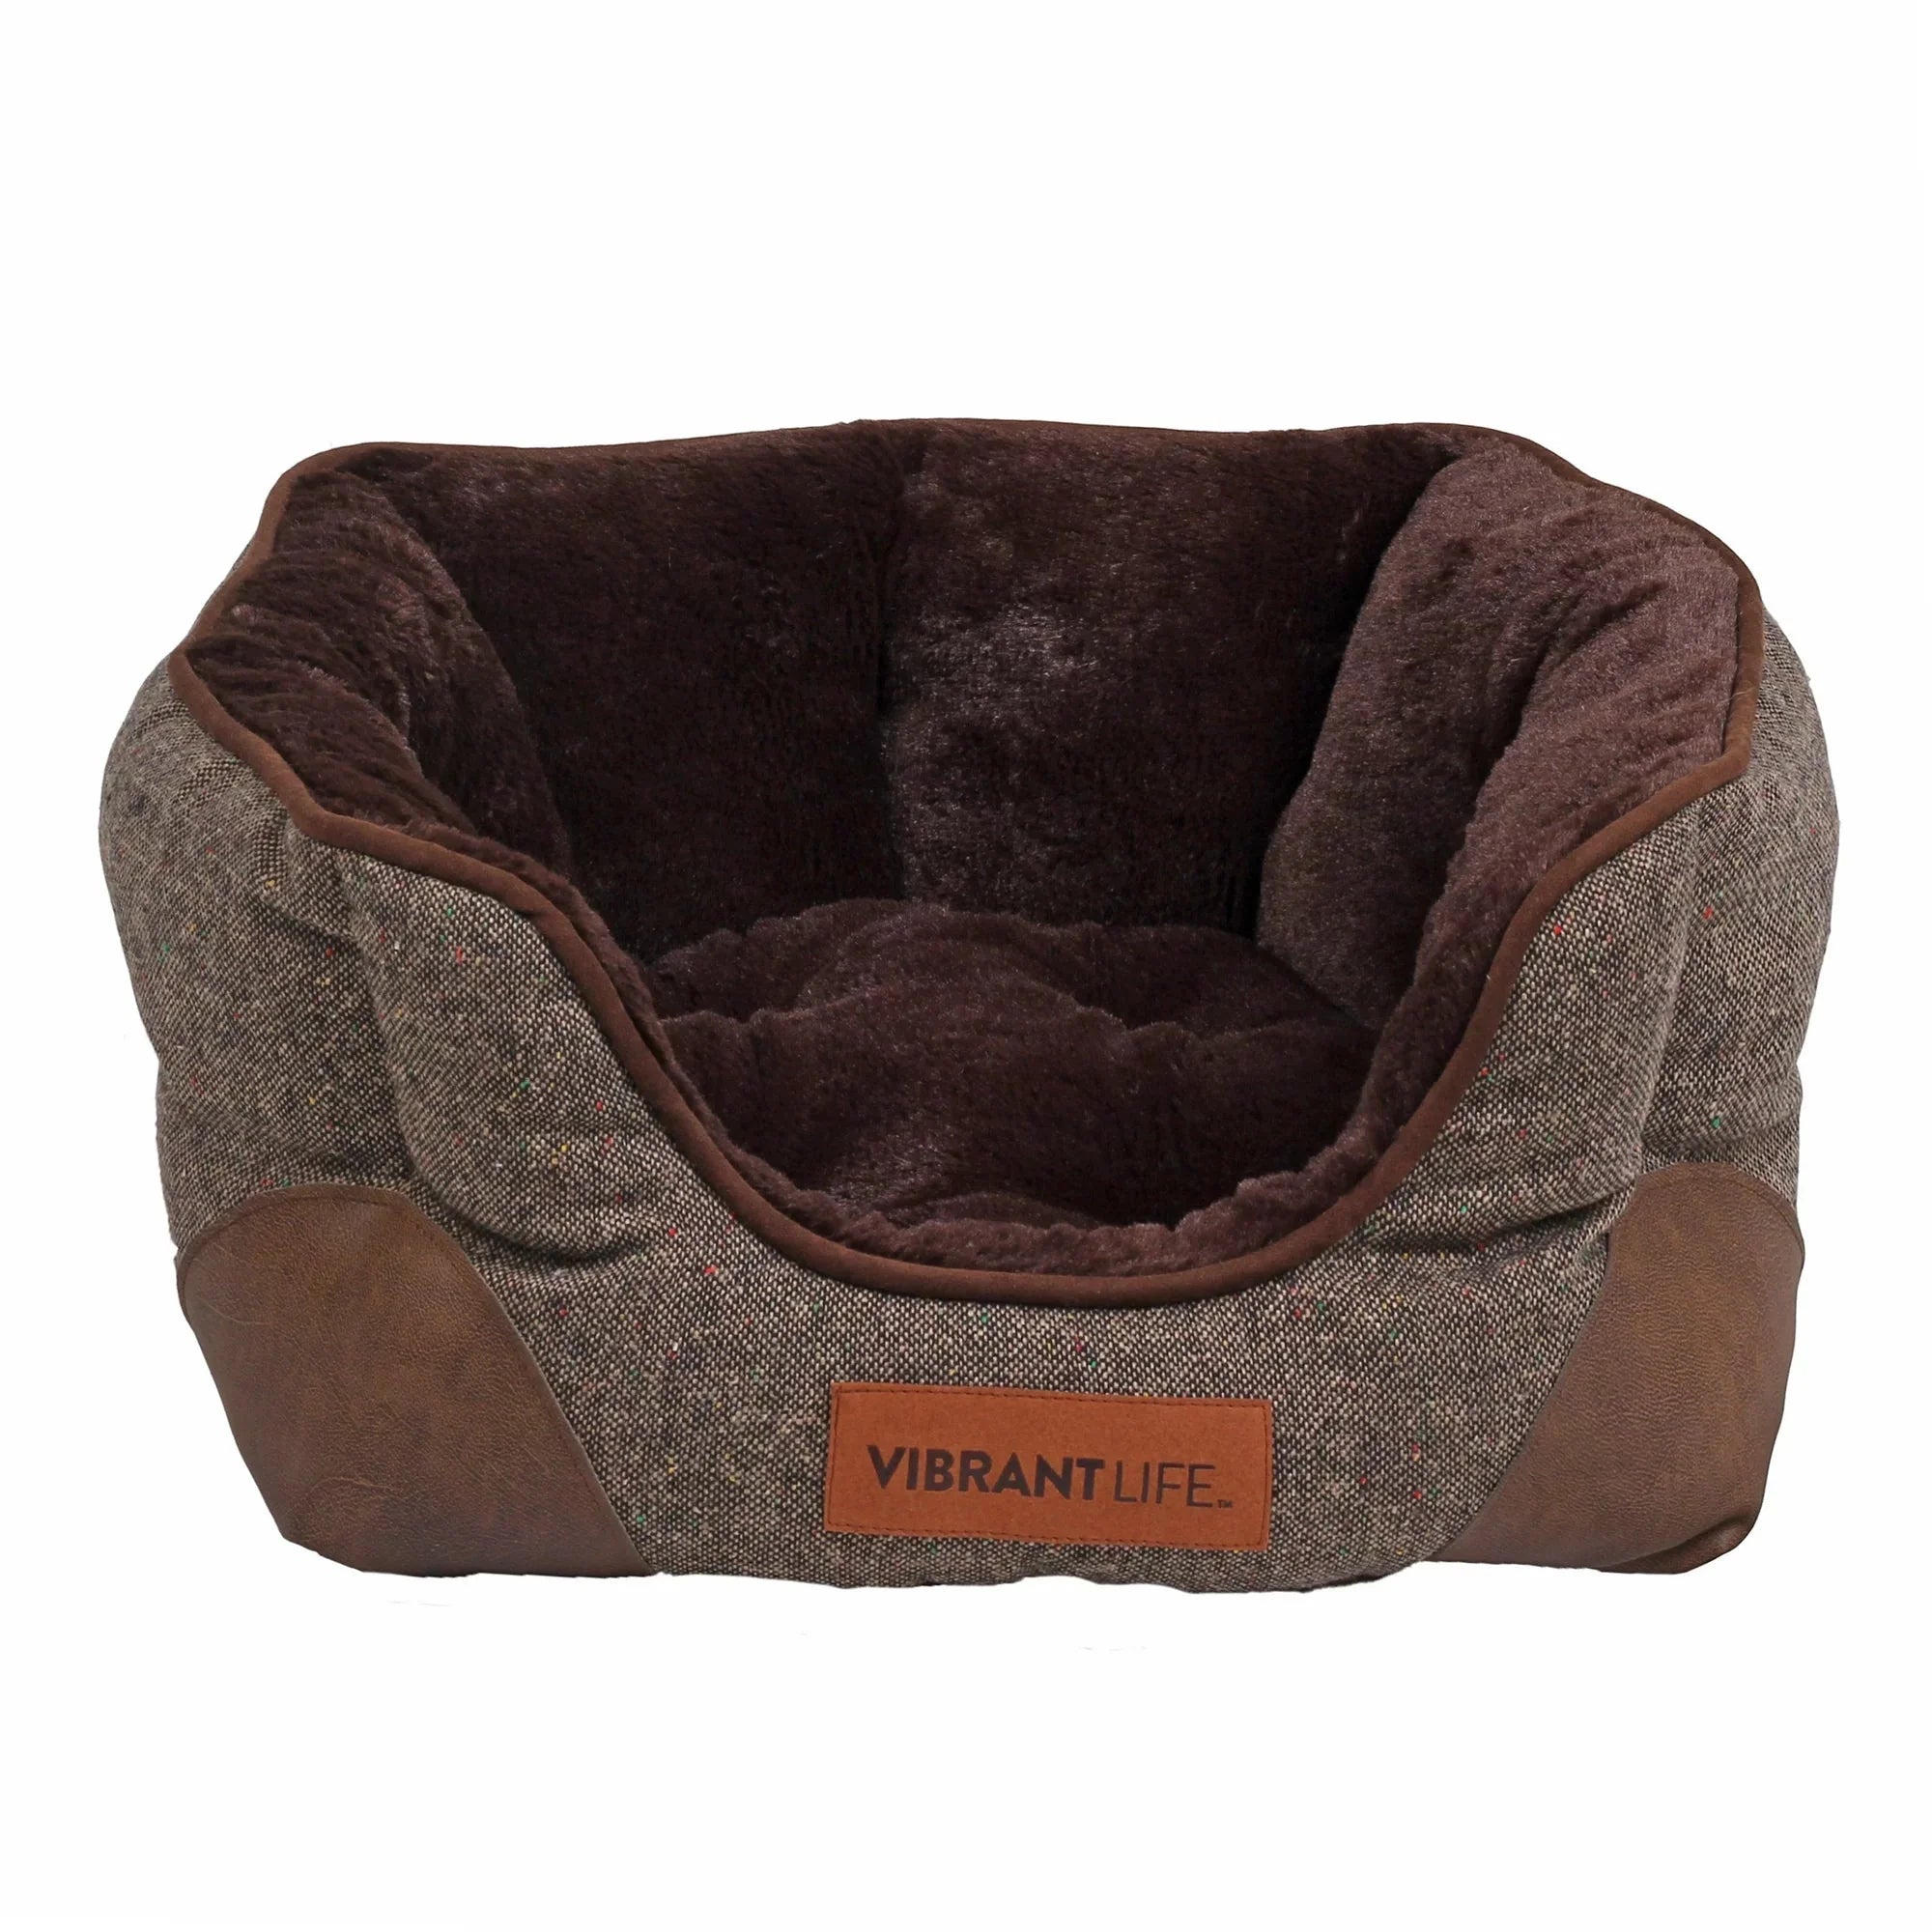 Wholesale prices with free shipping all over United States Vibrant Life Small Cozy Cuddler-Style Dog & Cat Bed, Bed with High Walls, Brown - Steven Deals